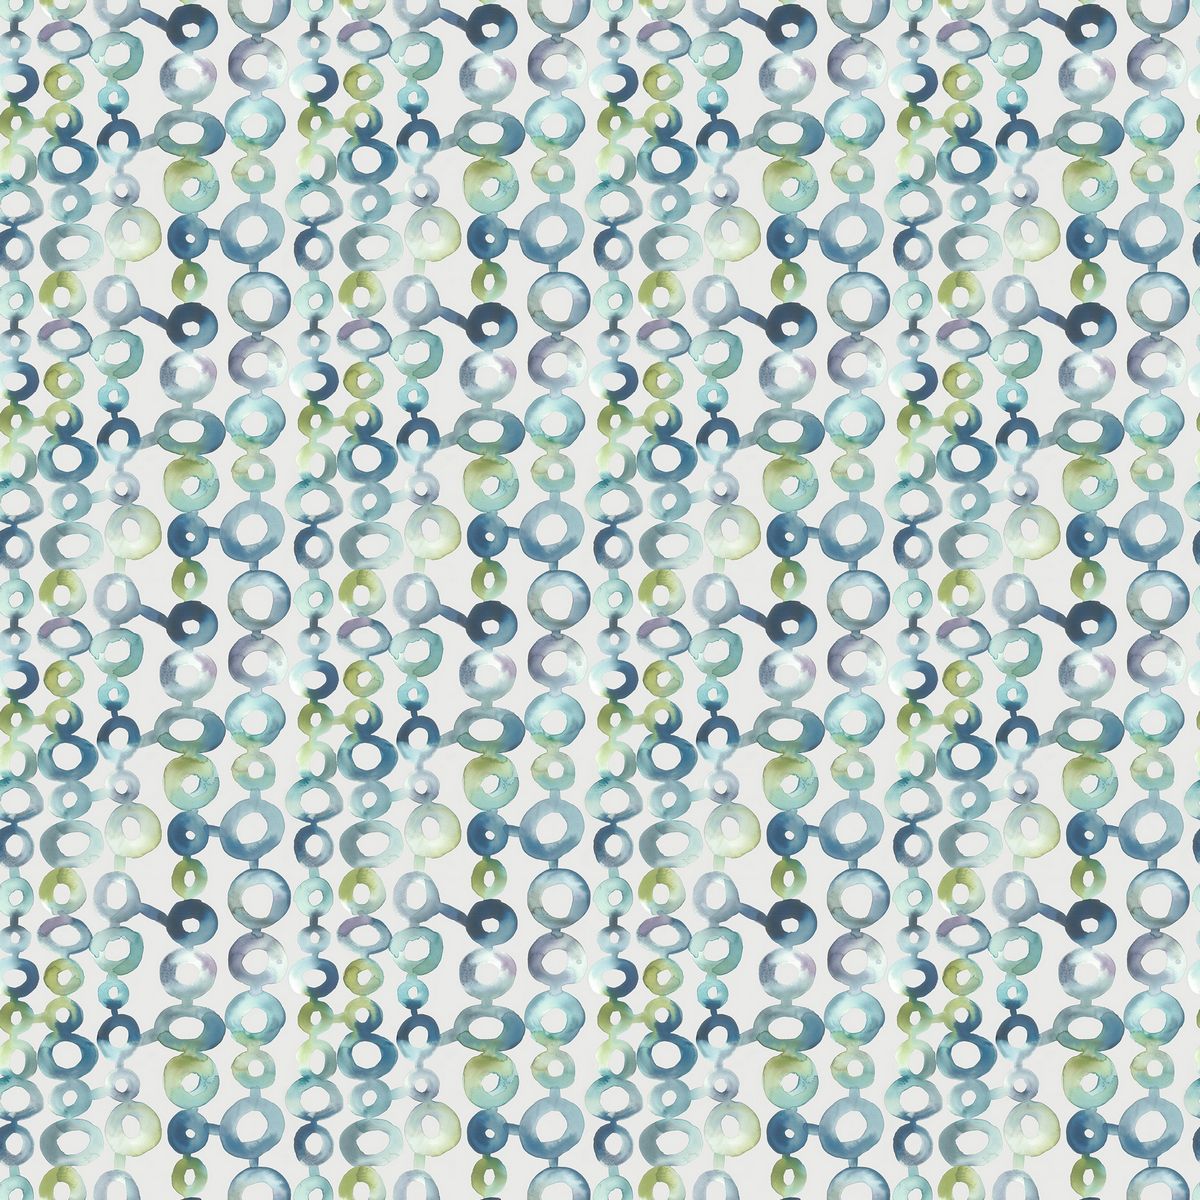 Macapa Ocean Fabric by Voyage Maison